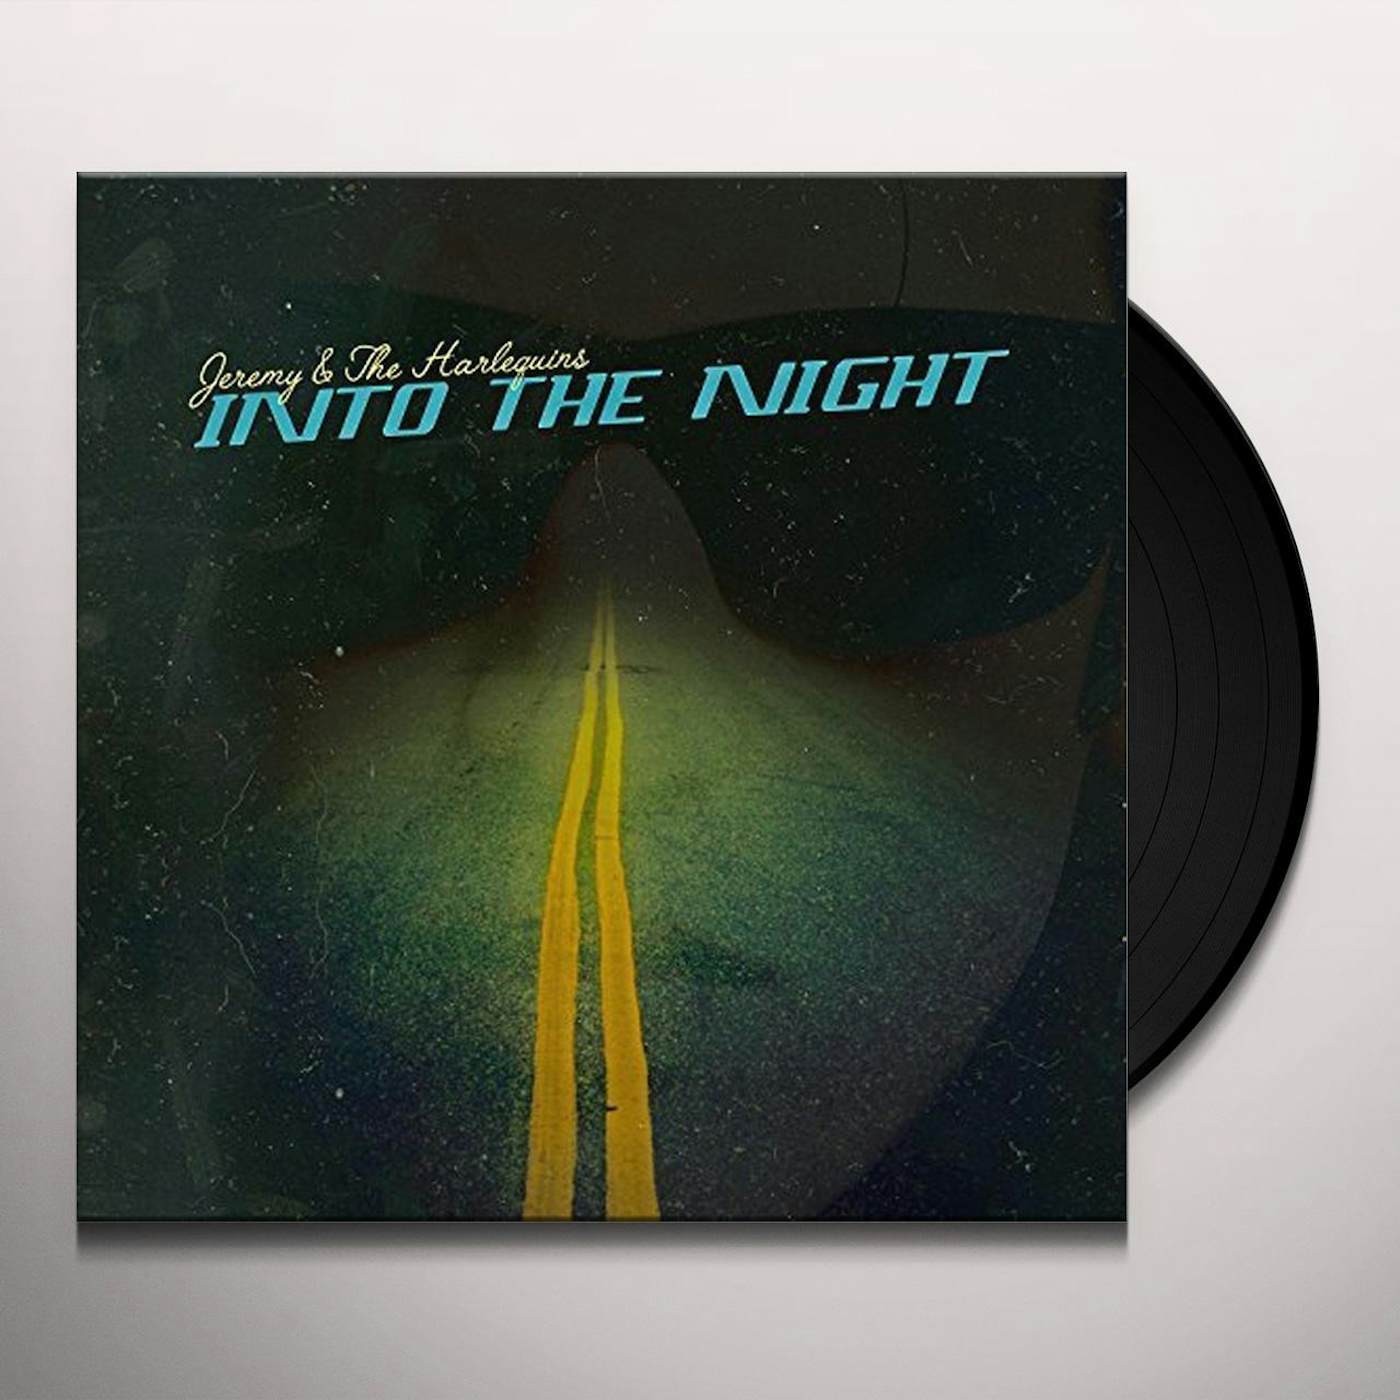 Jeremy & The Harlequins Into the Night Vinyl Record